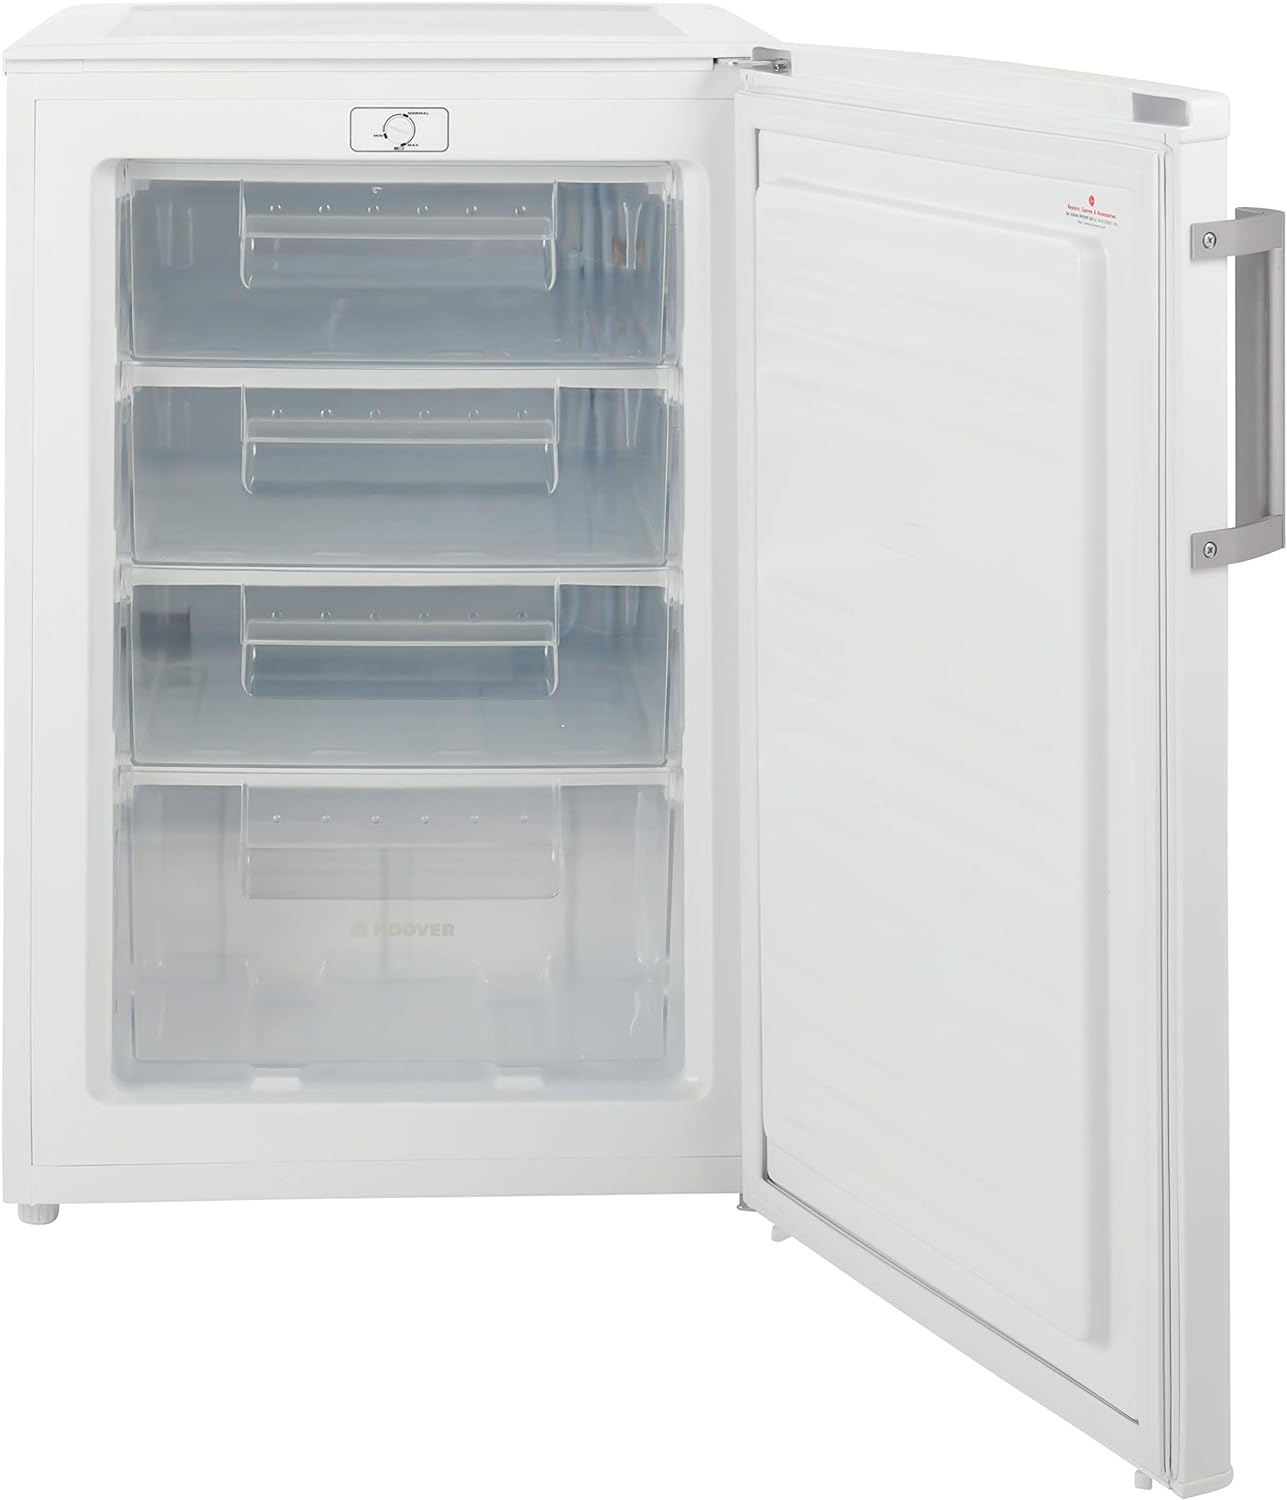 hoover hvtlu542whk freestanding under counter freezer 82l total capacity 55cm wide white energy class f 9